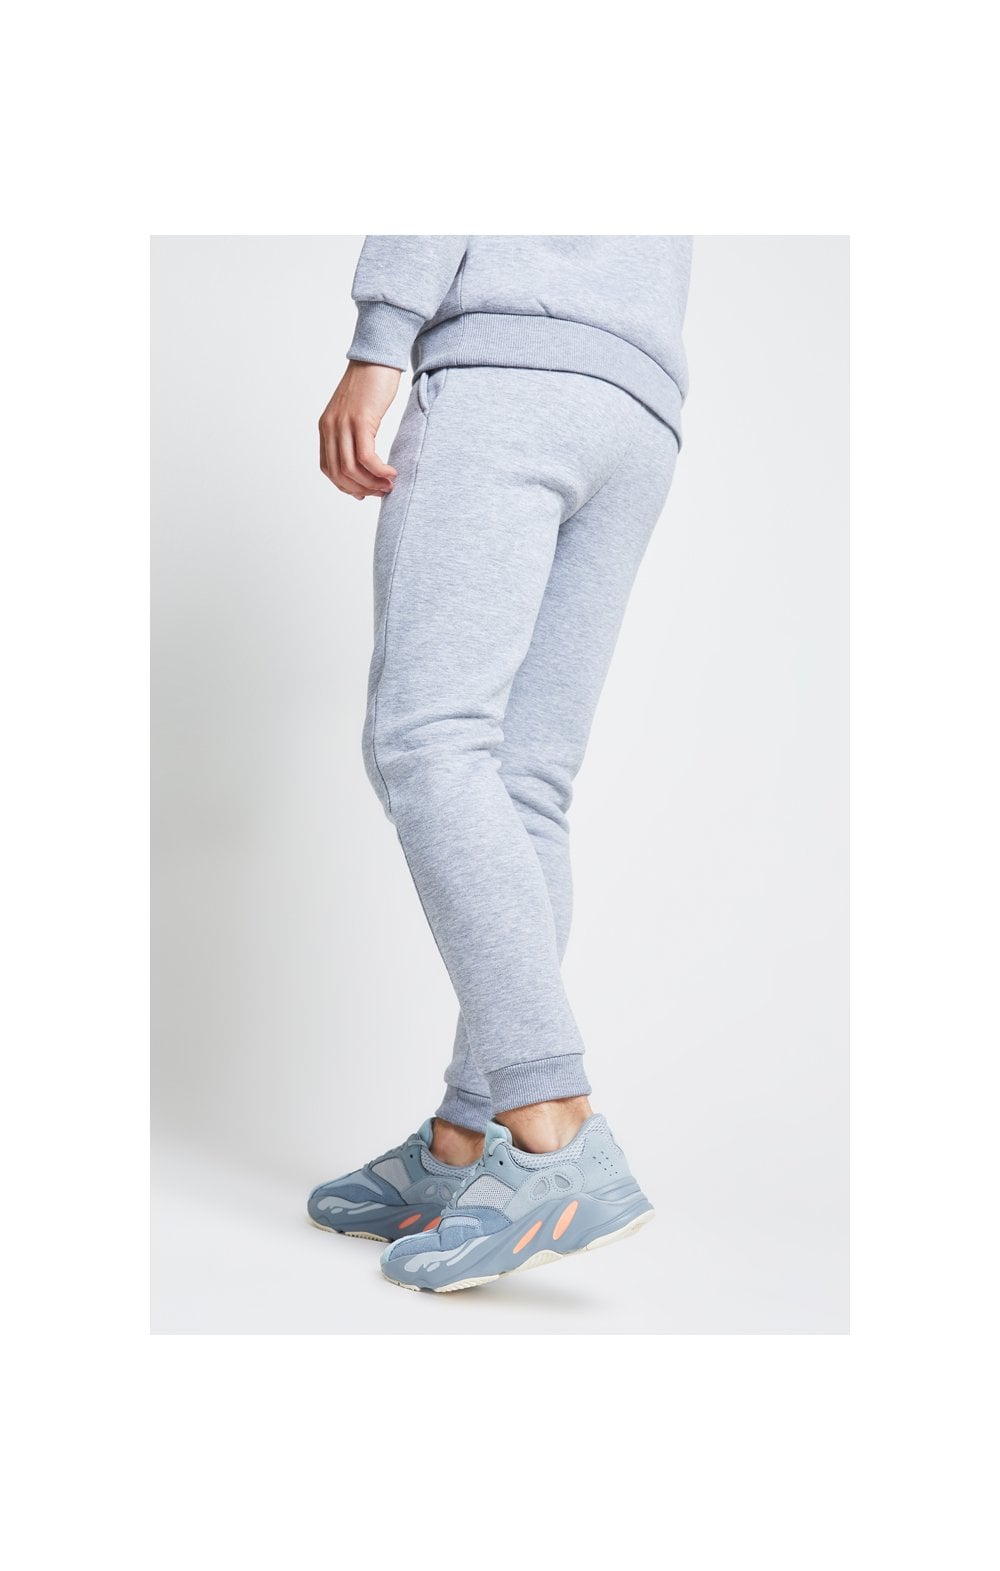 Load image into Gallery viewer, Boys Illusive Grey Marl Essentials Jogger (3)